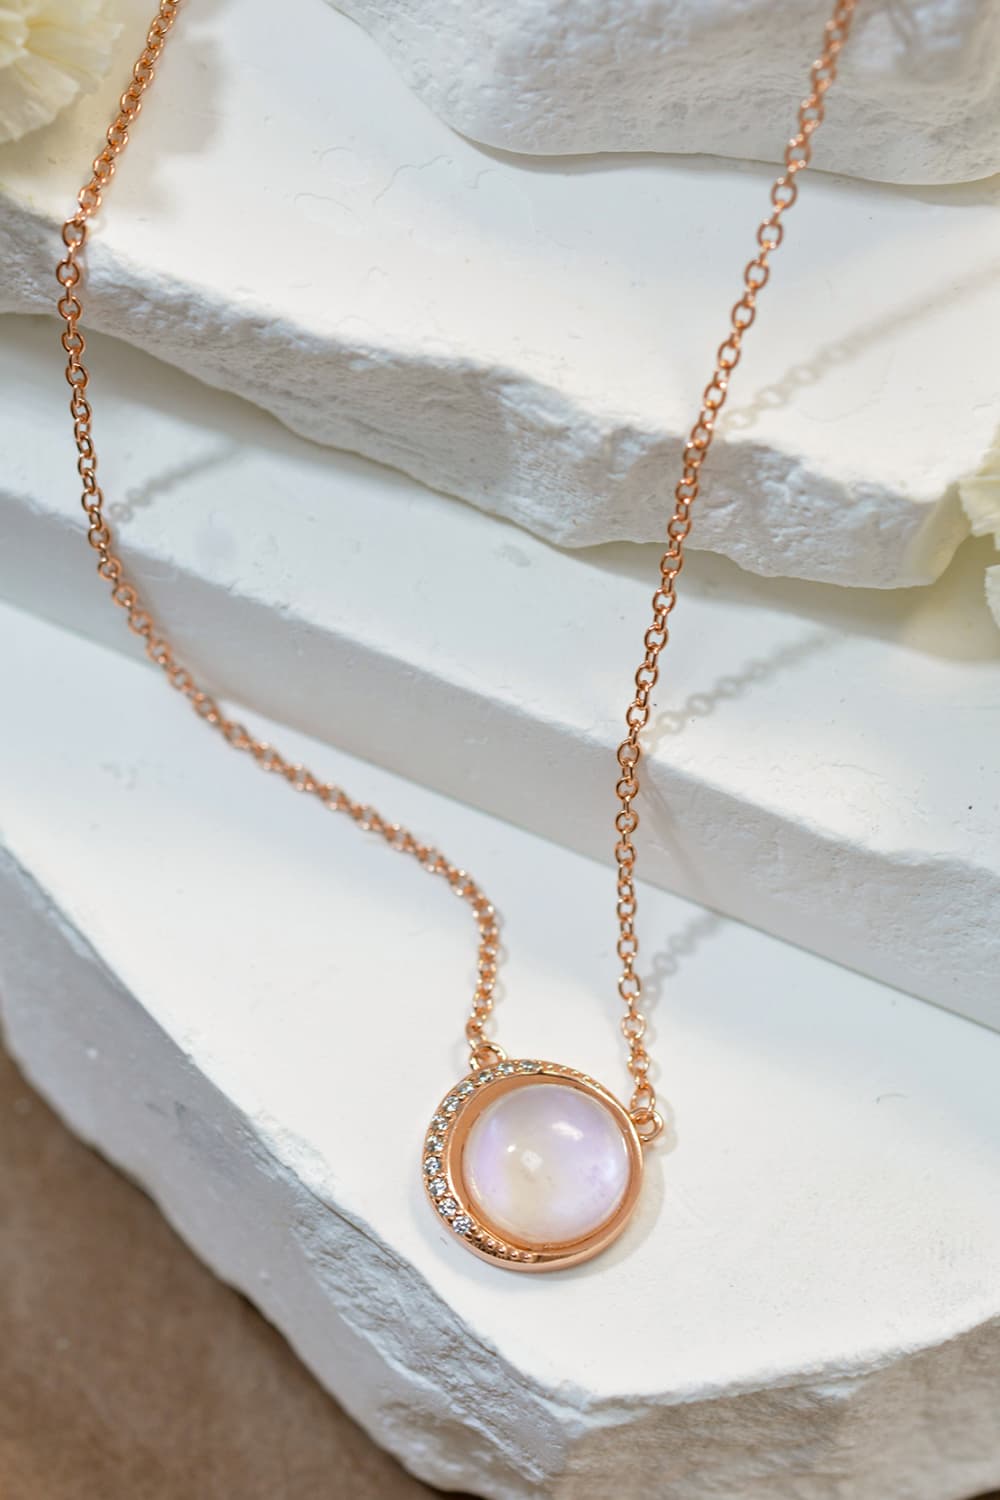 High Quality Natural Moonstone 18K Rose Gold-Plated 925 Sterling Silver Necklace BLUE ZONE PLANET